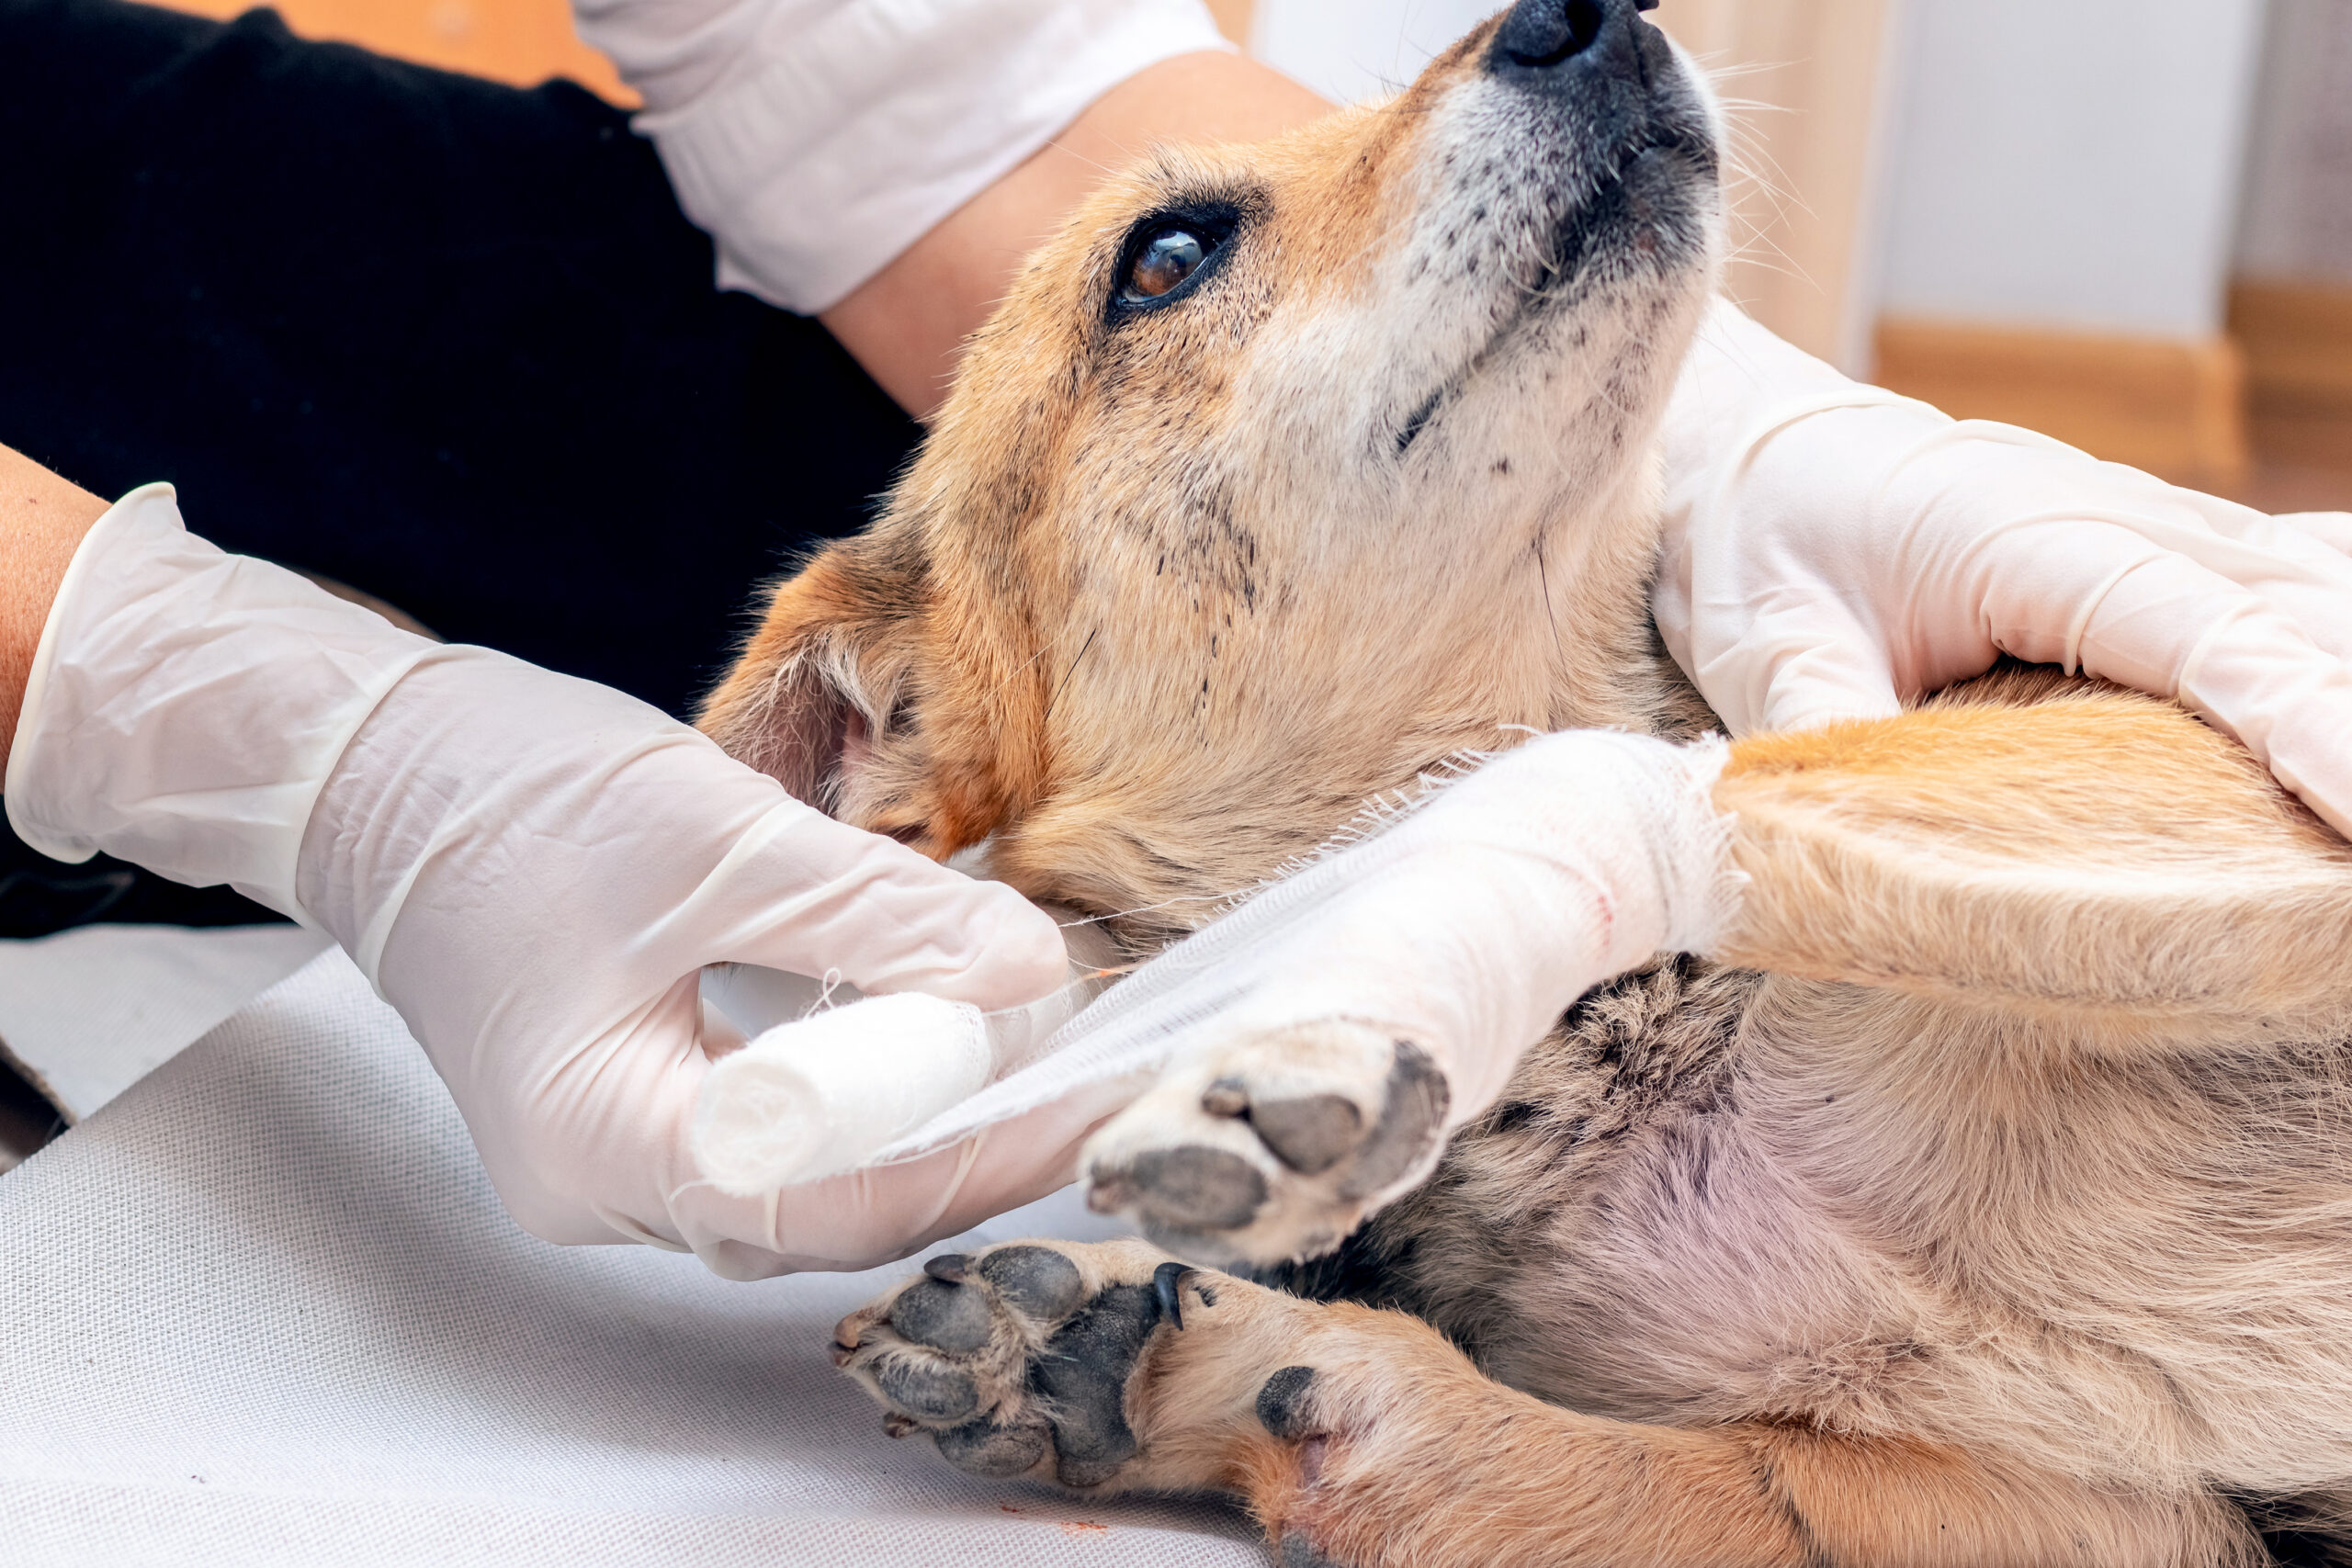 The vet applies a bandage to the dog's injured leg